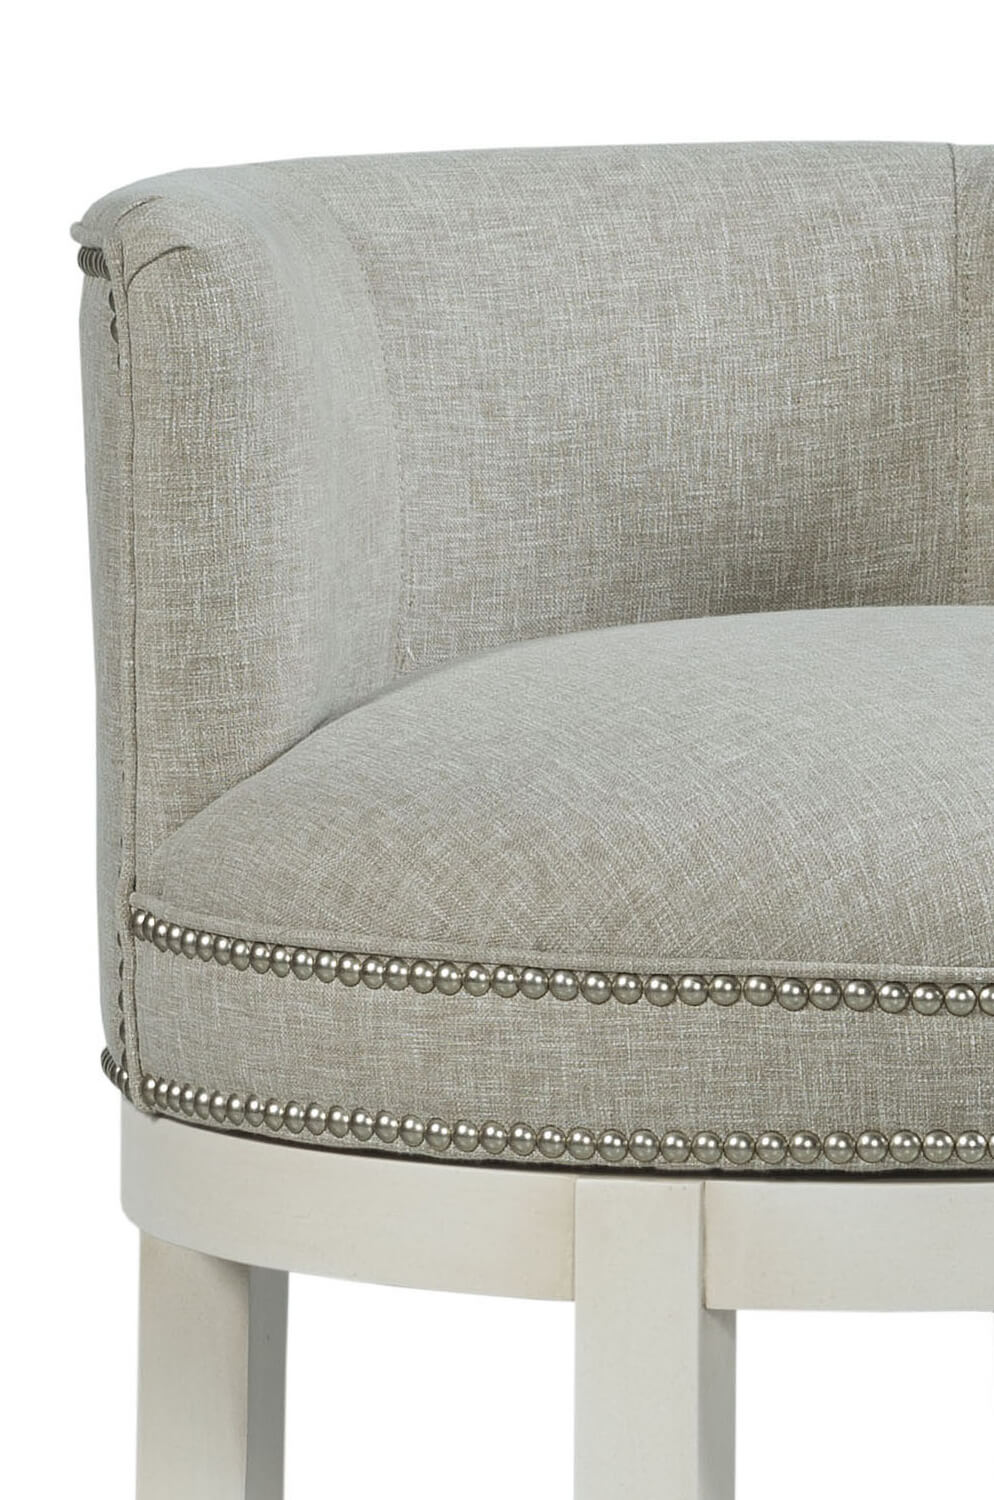 Cosmo Upholstered Nailhead Swivel Stool, Cosmo Counter Stool